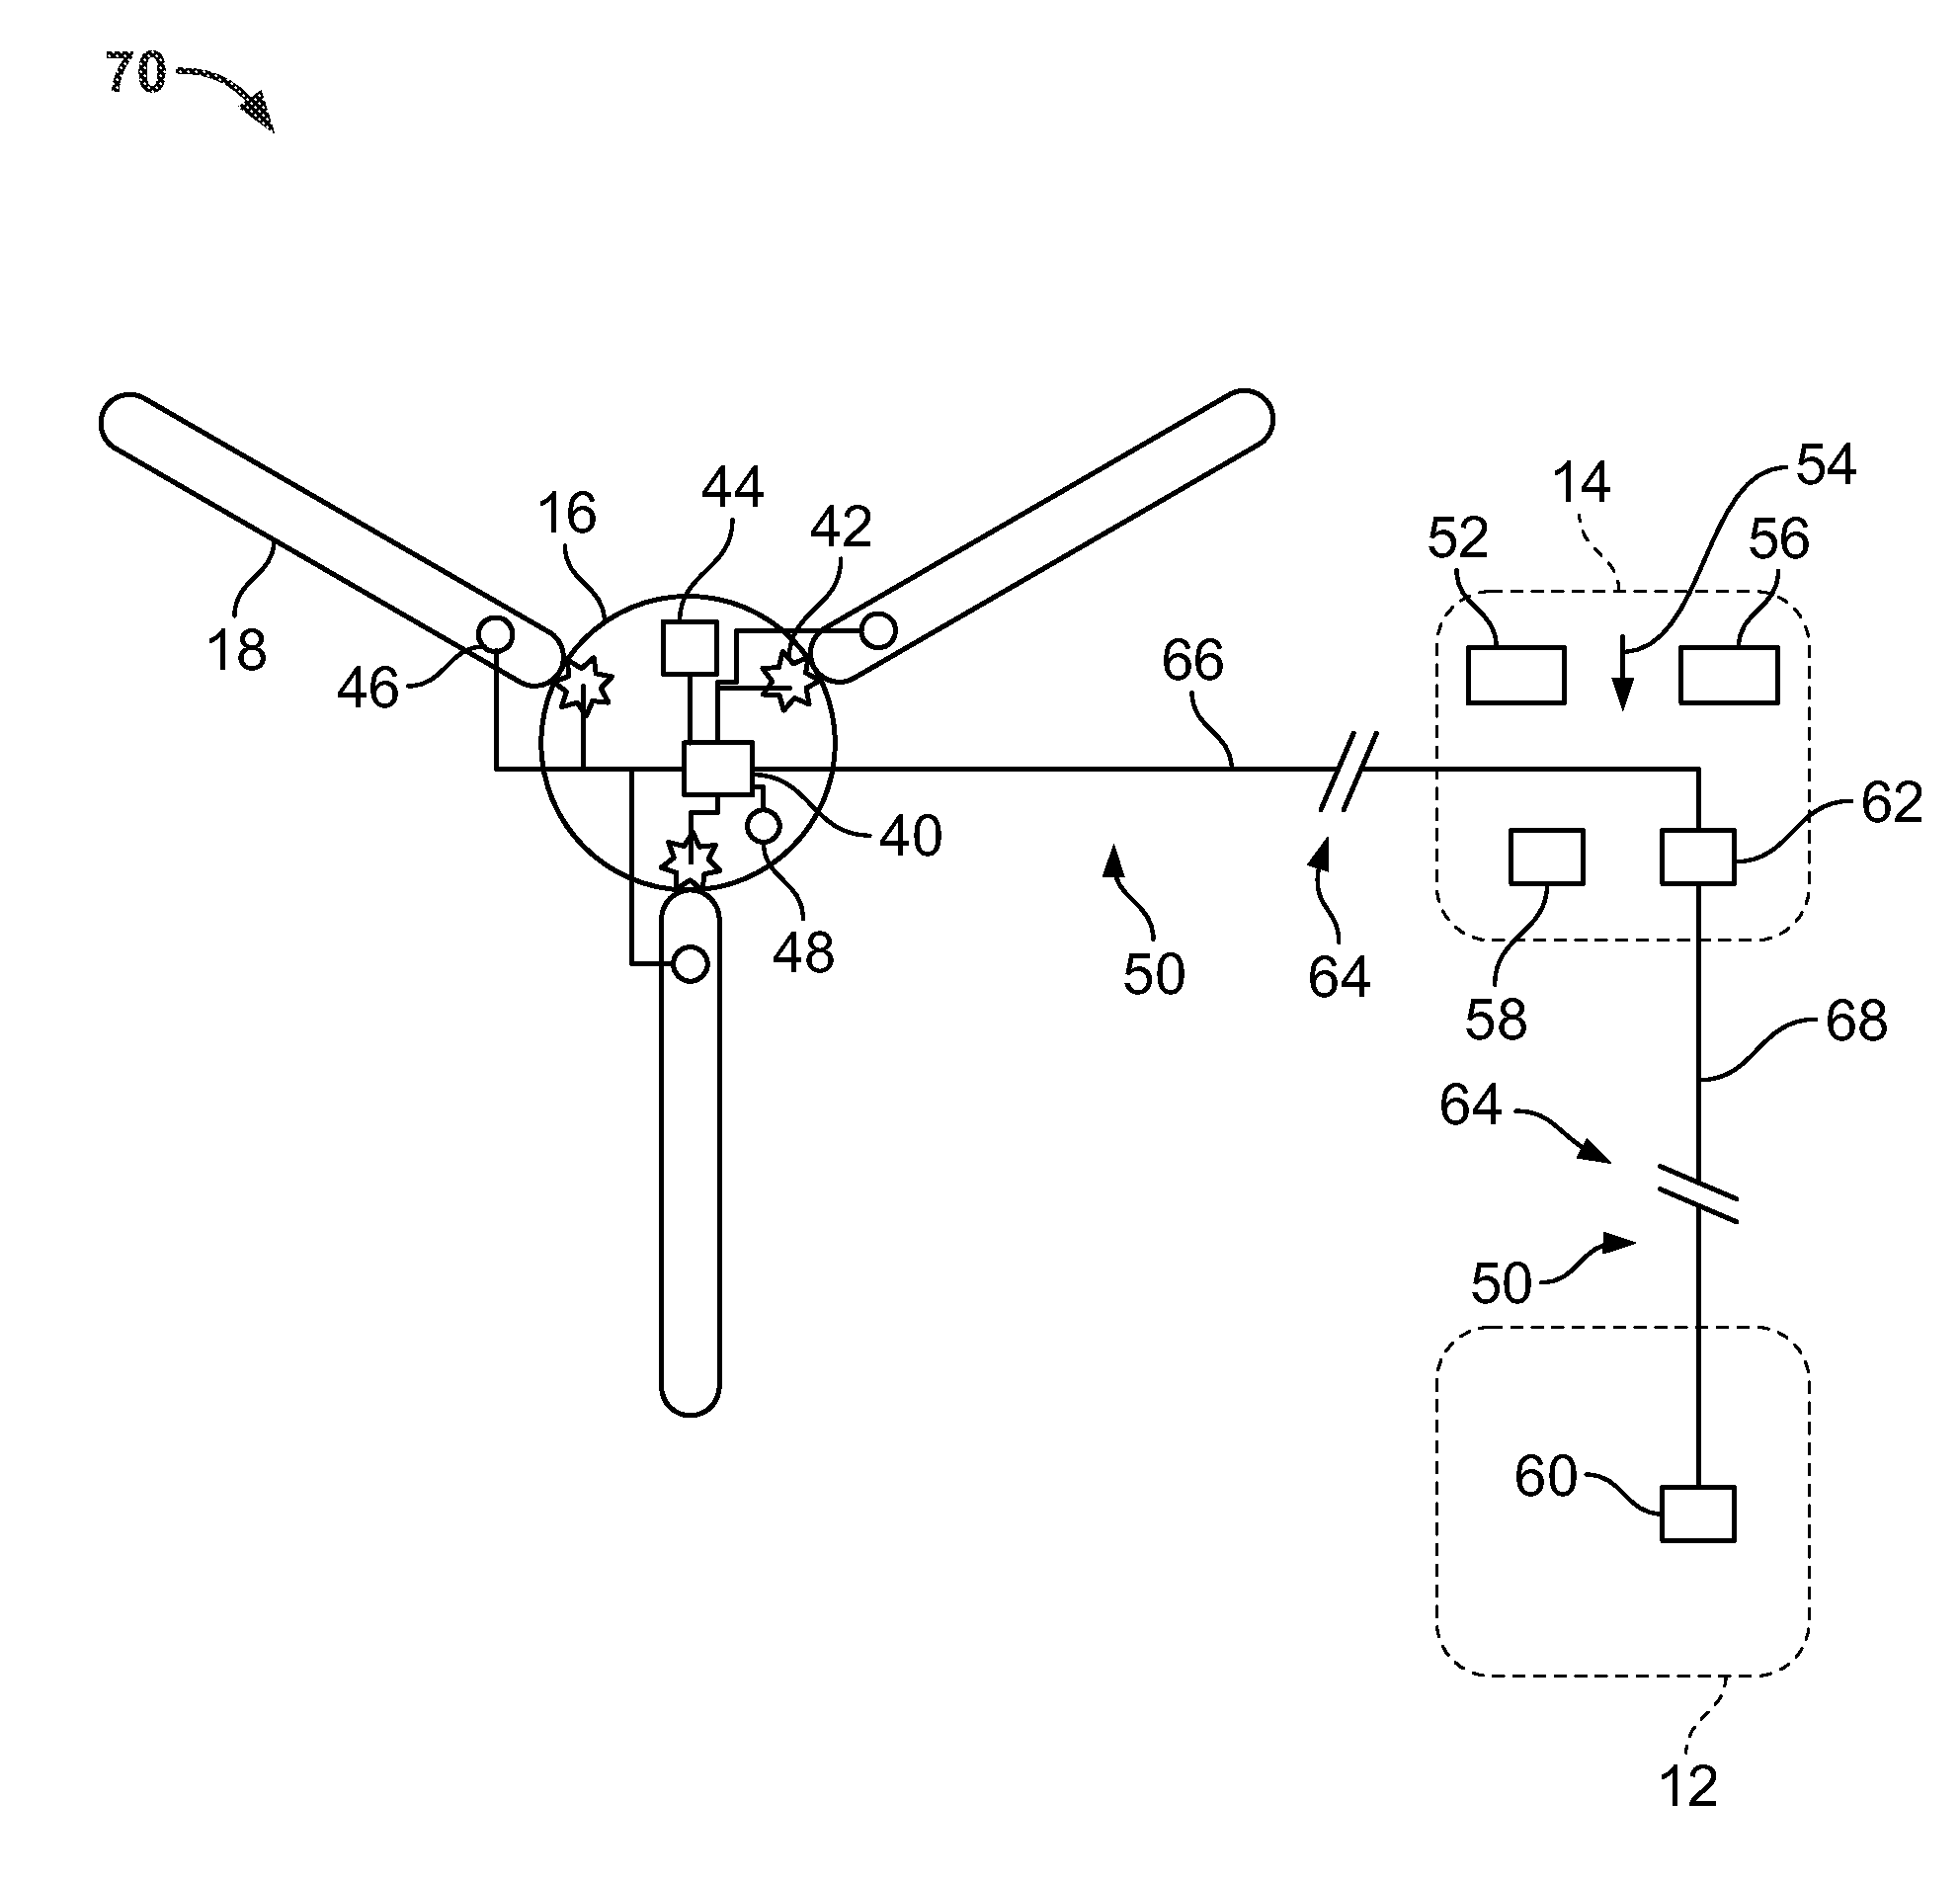 Method and Apparatus for Operating a Wind Turbine During a Loss of Communication